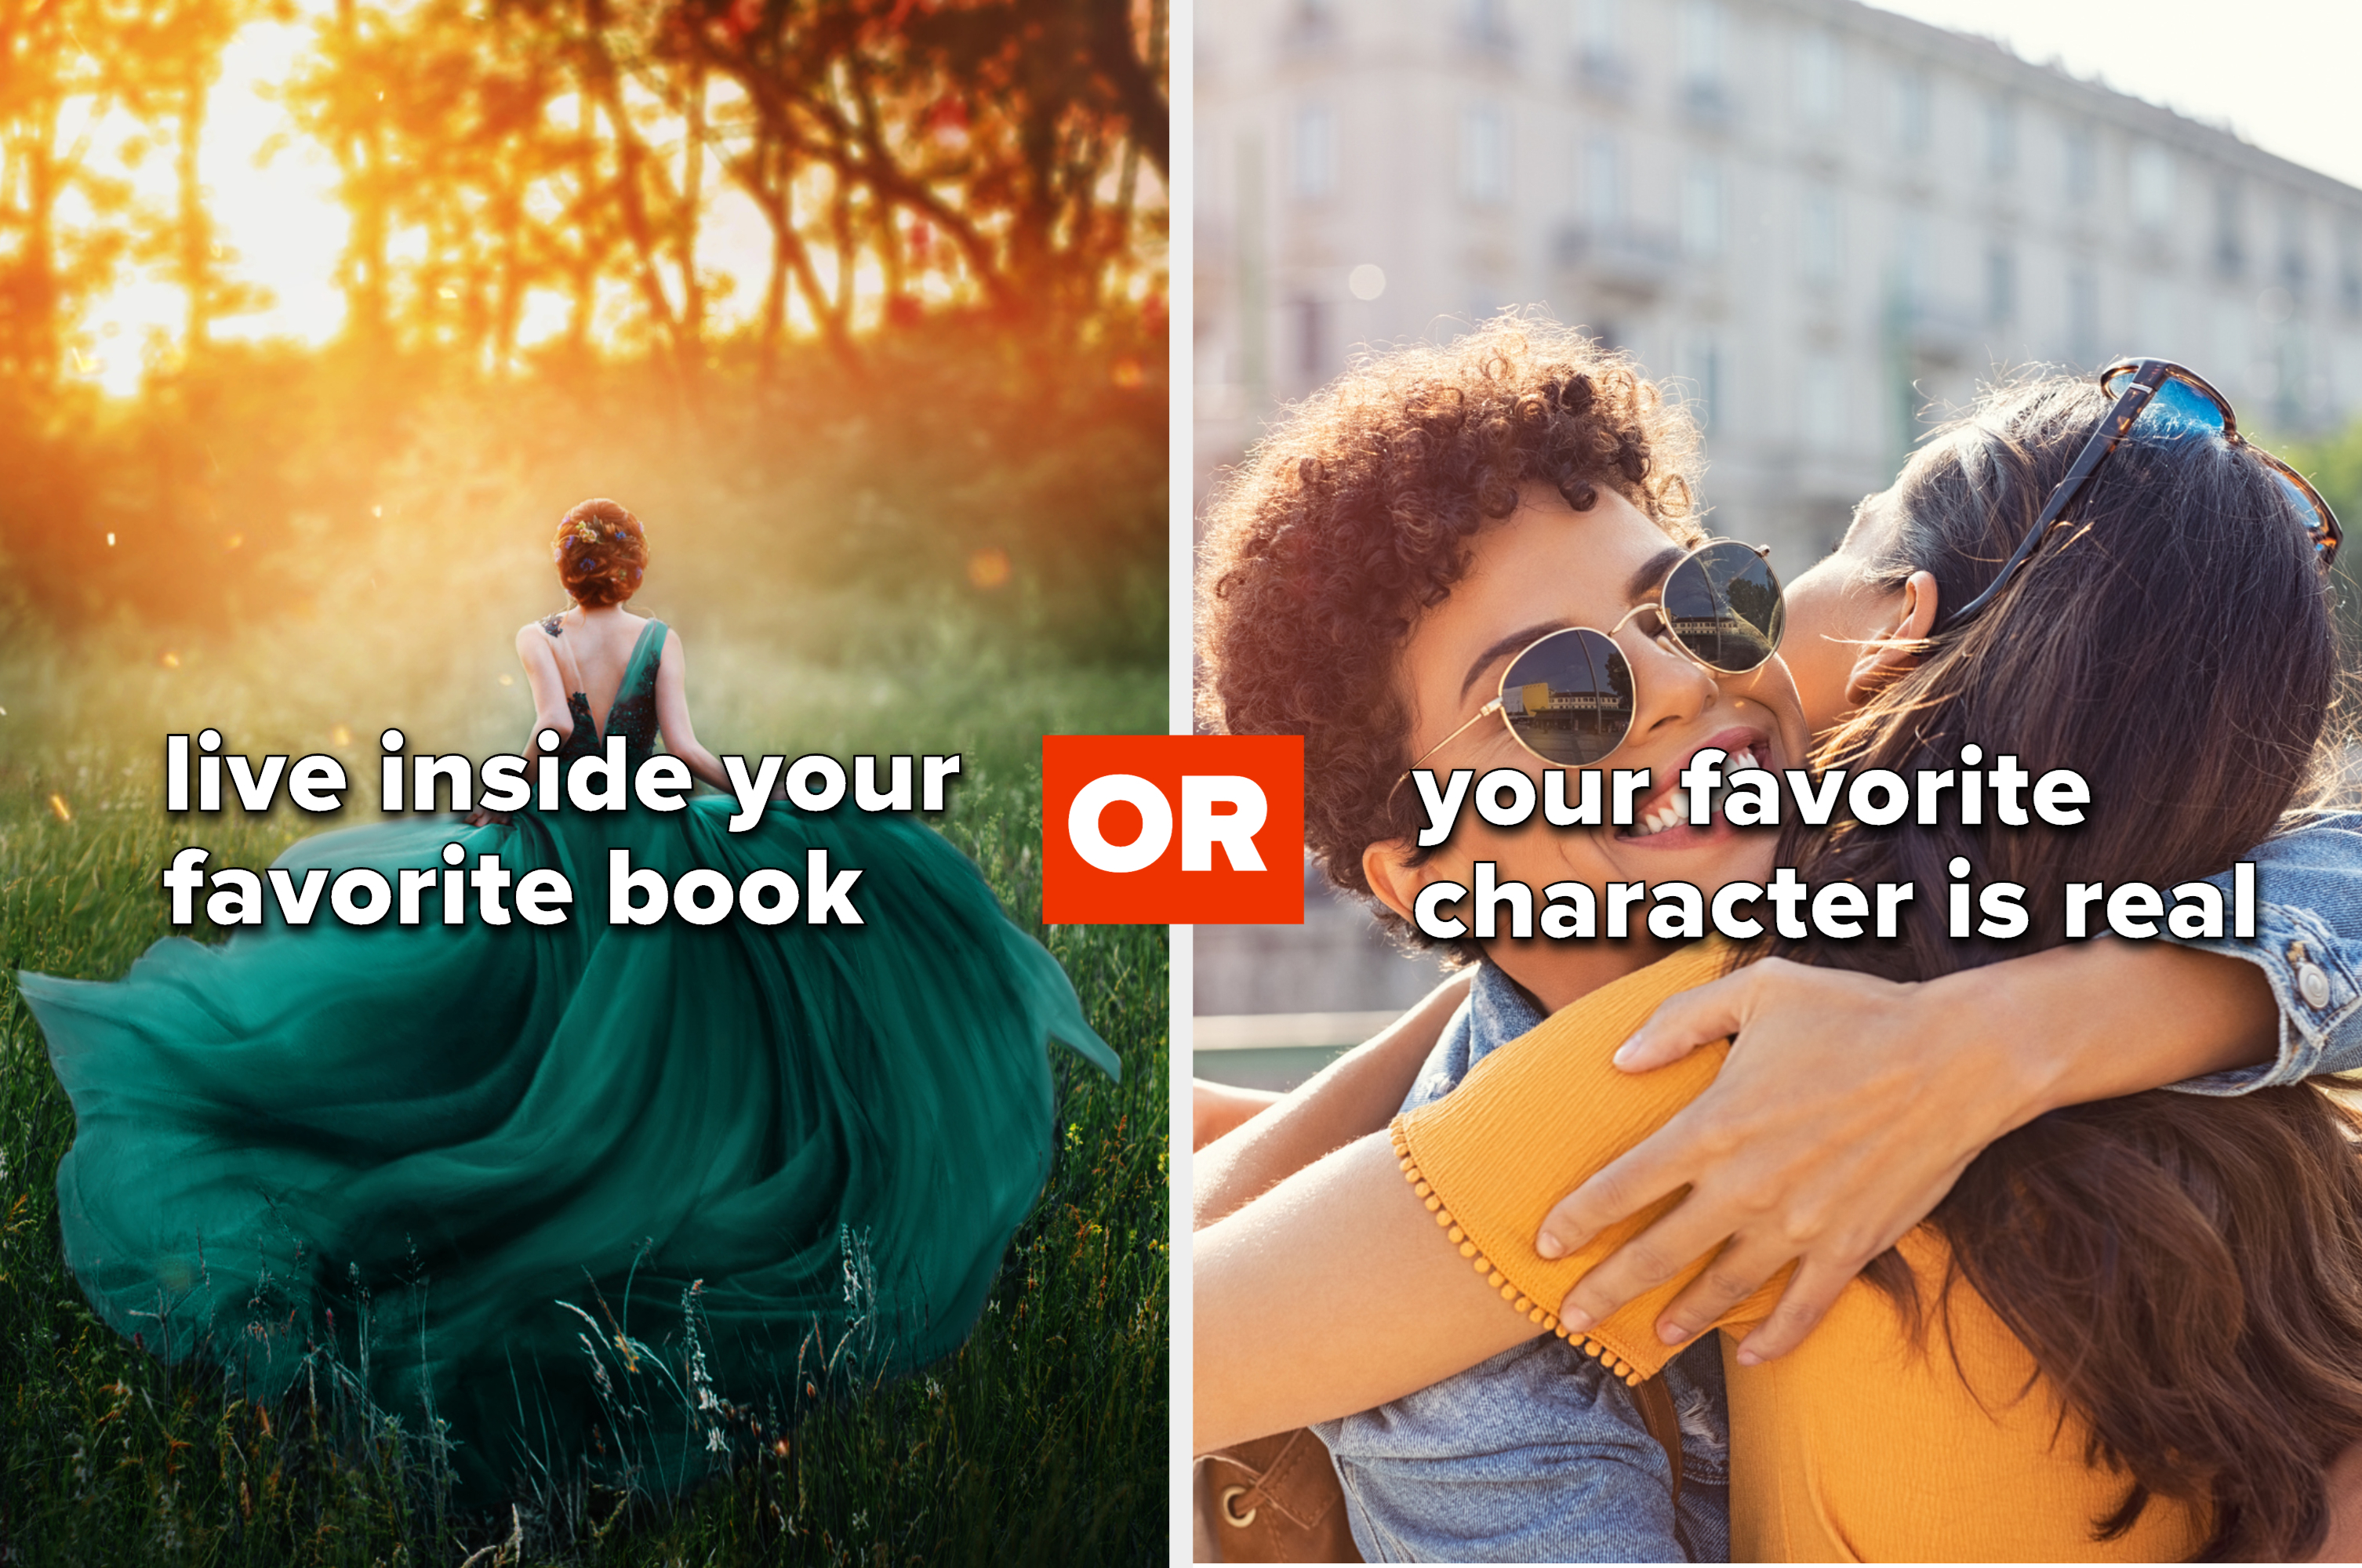 The Hardest Game of 'Would You Rather' for Book Nerds Tag – Mint Loves Books